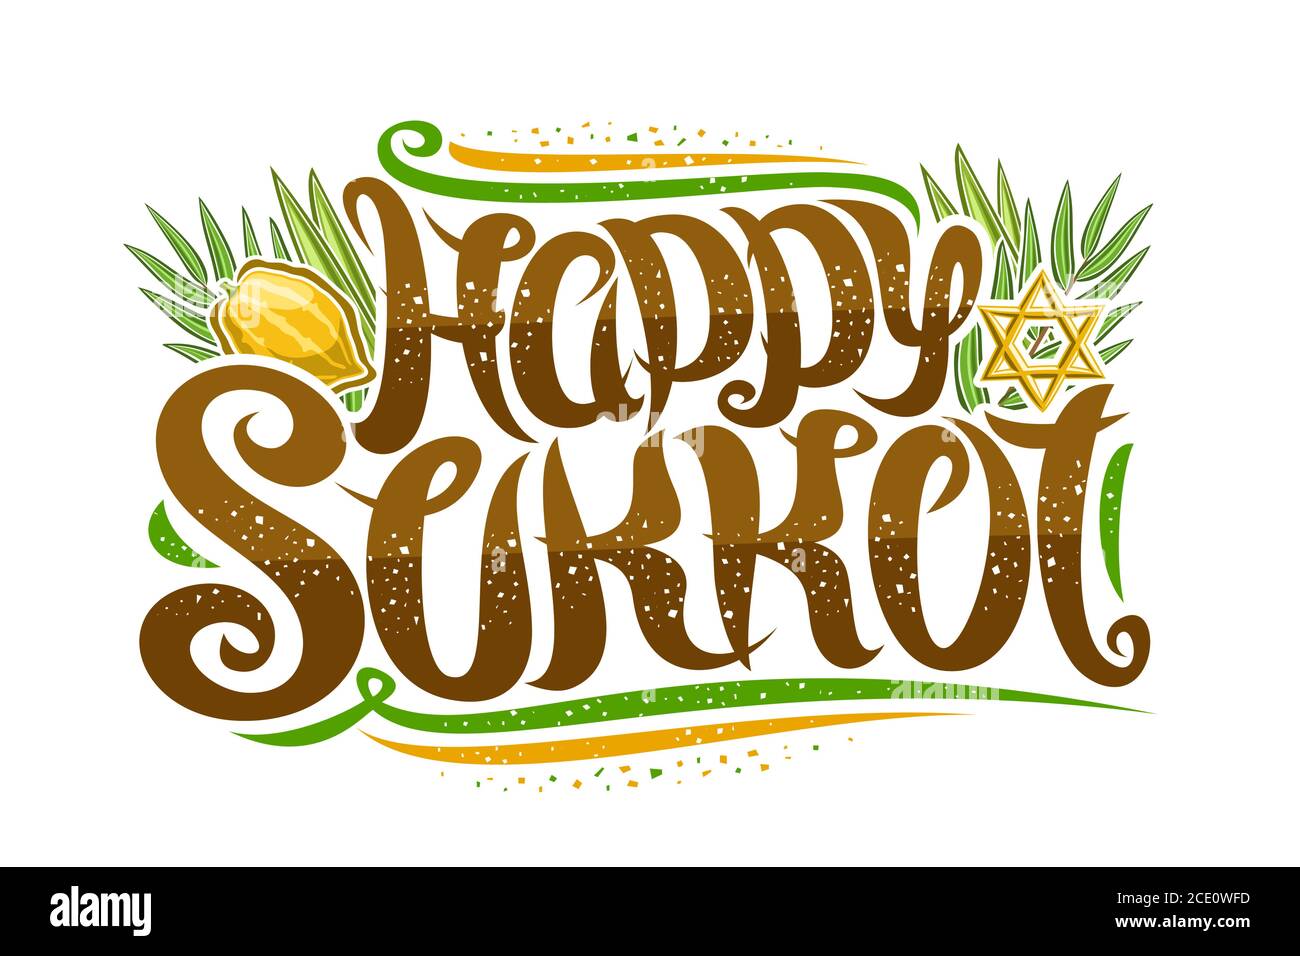 Vector greeting card for Jewish Sukkot, creative calligraphic font, decorative art flourishes, star of David and traditional four species, banner with Stock Vector